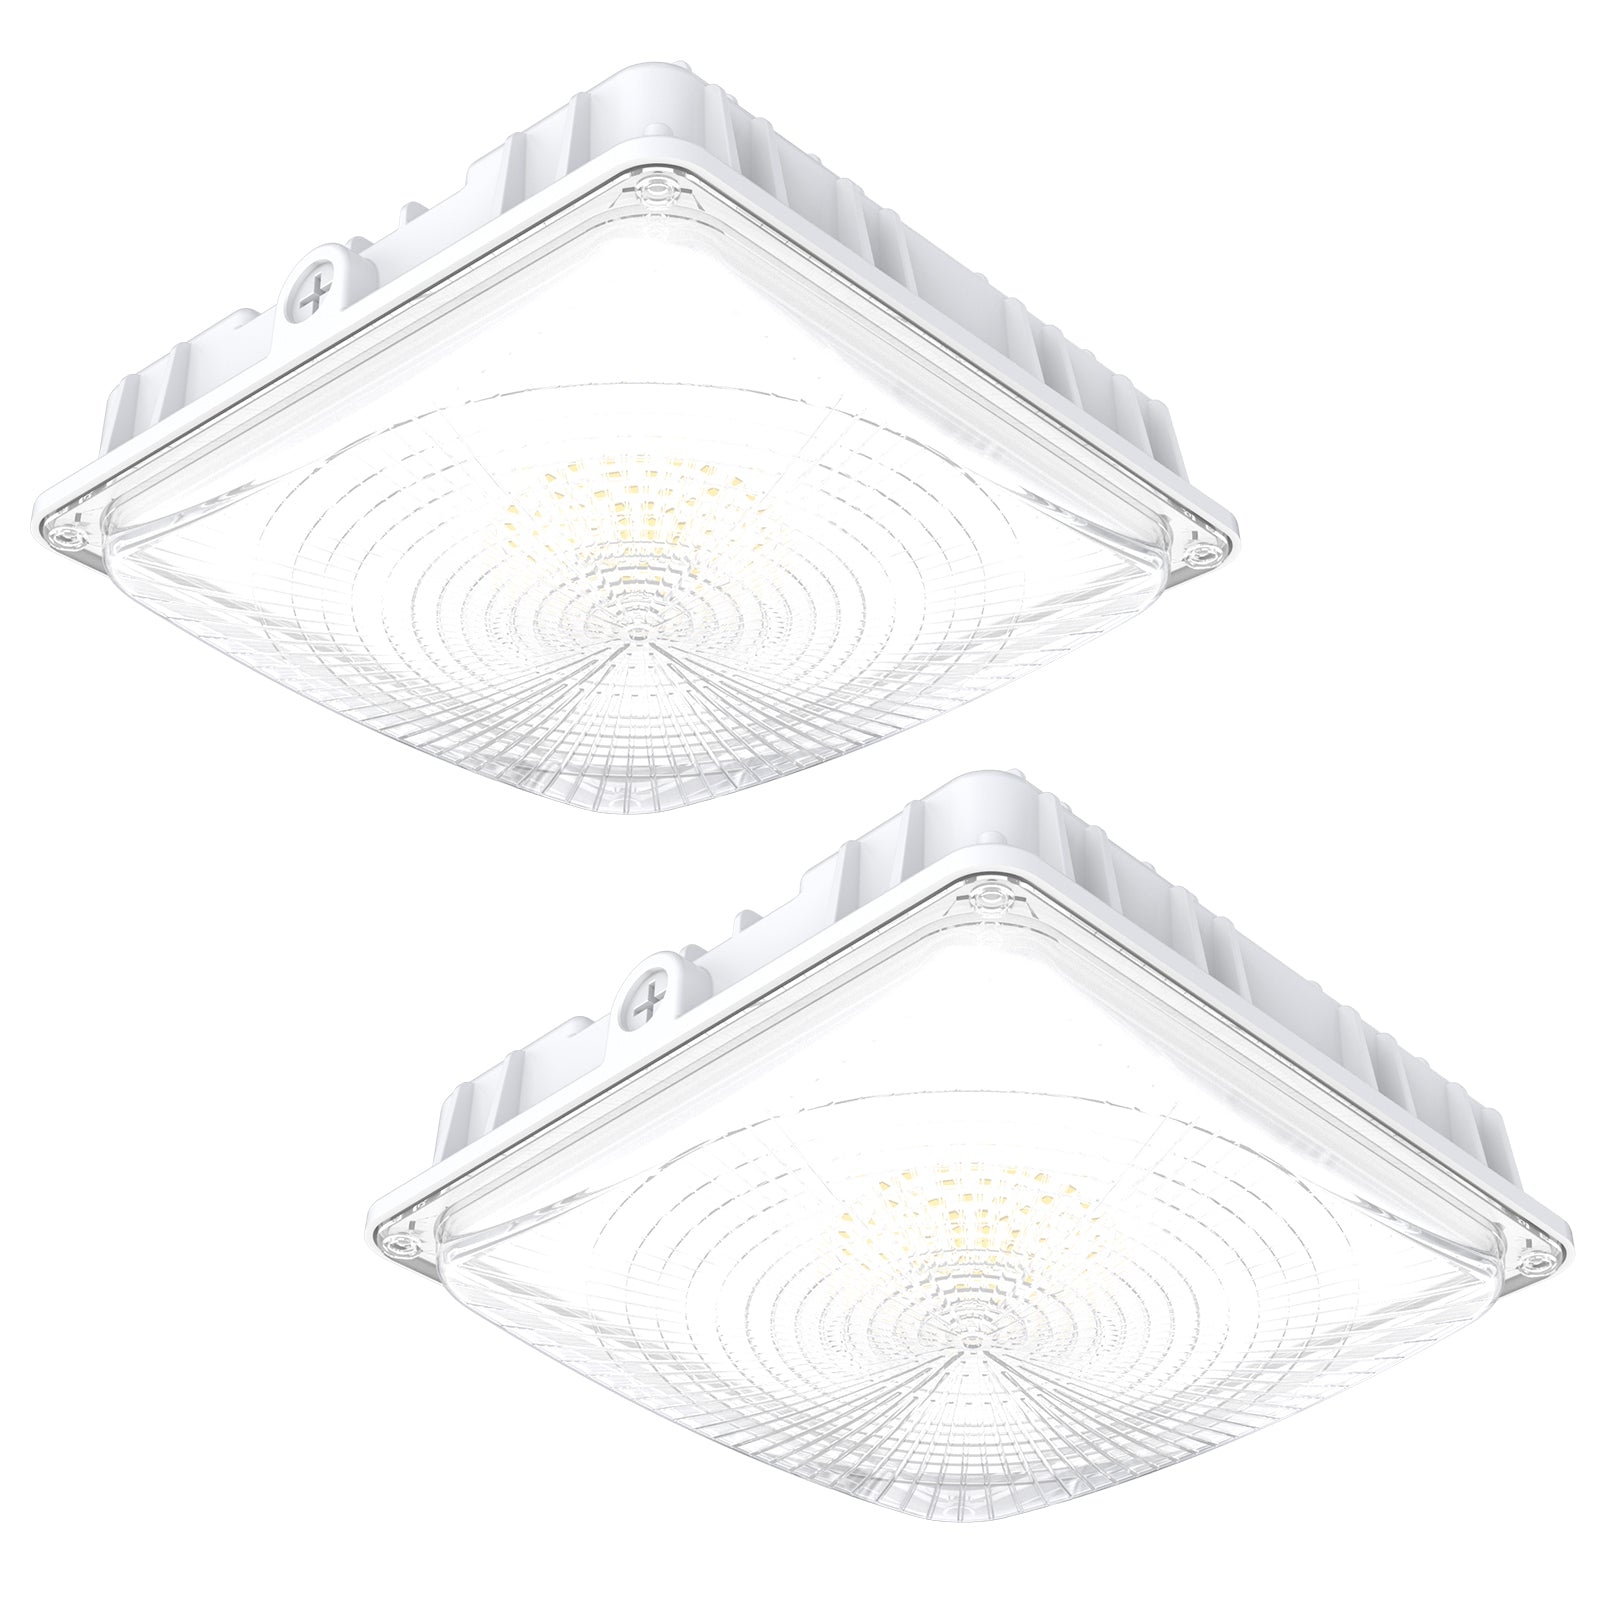 Contractors' Pick - Canopy Light - CPA Series, 2-Pack, Selectable Wattage&CCT, 4000/5000K